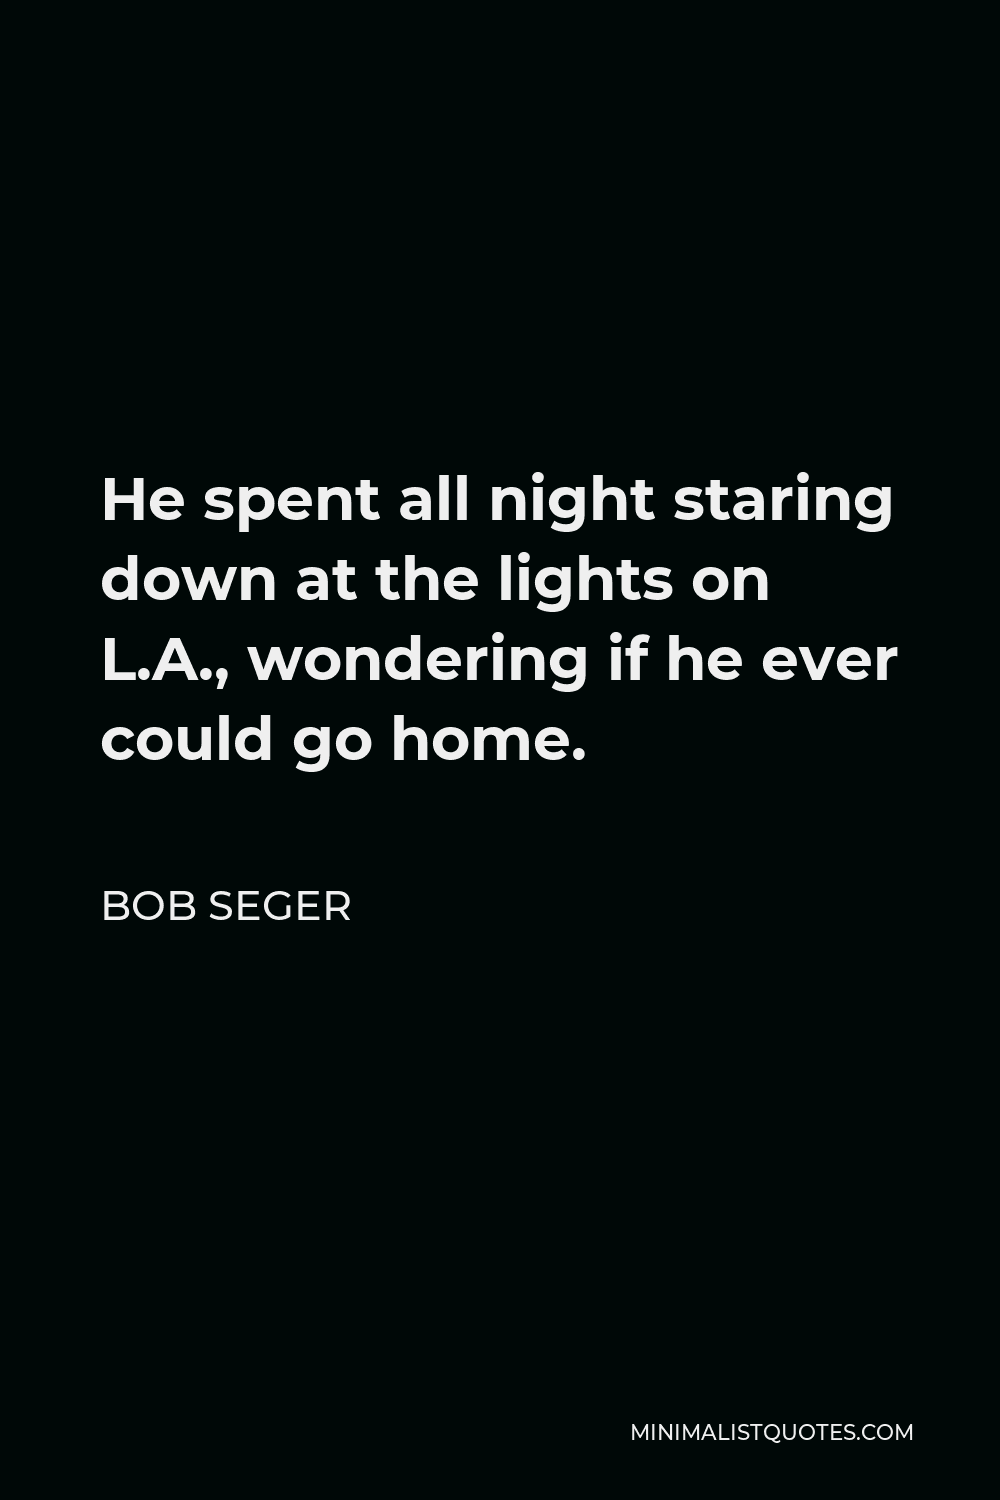 Bob Seger Quote - He spent all night staring down at the lights on L.A., wondering if he ever could go home.